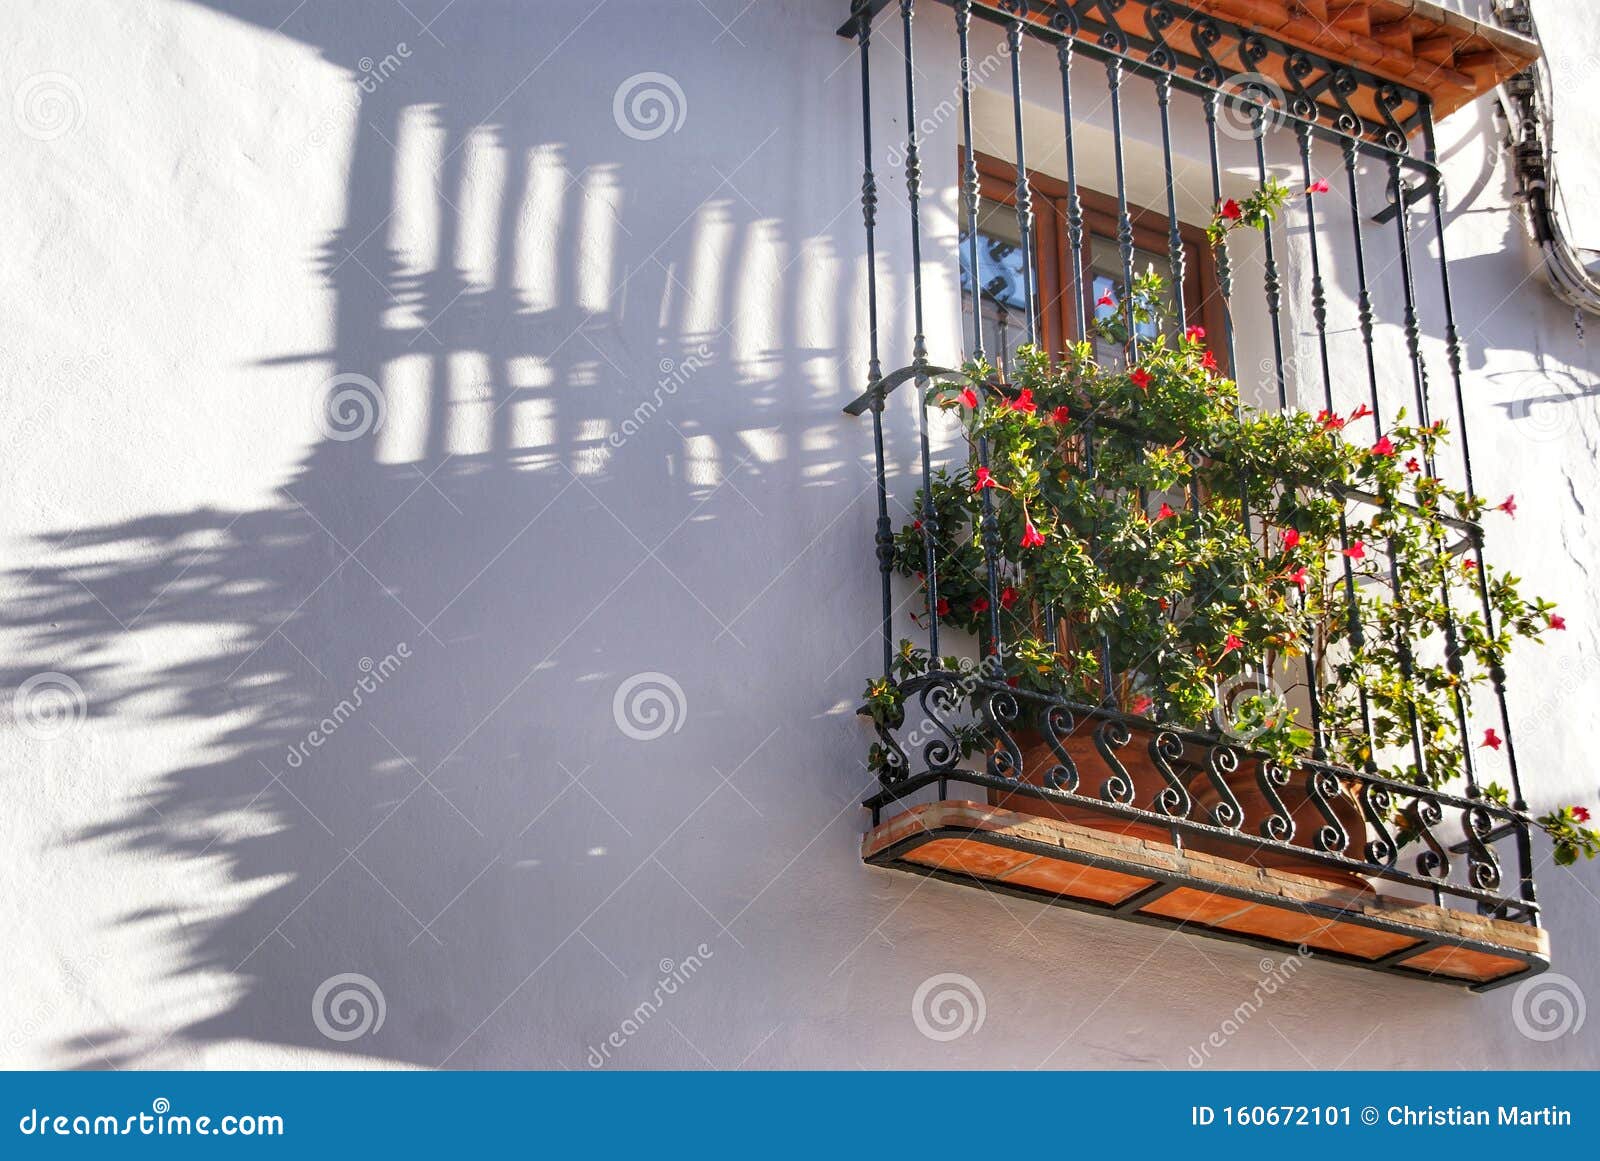 typical window in andalusia